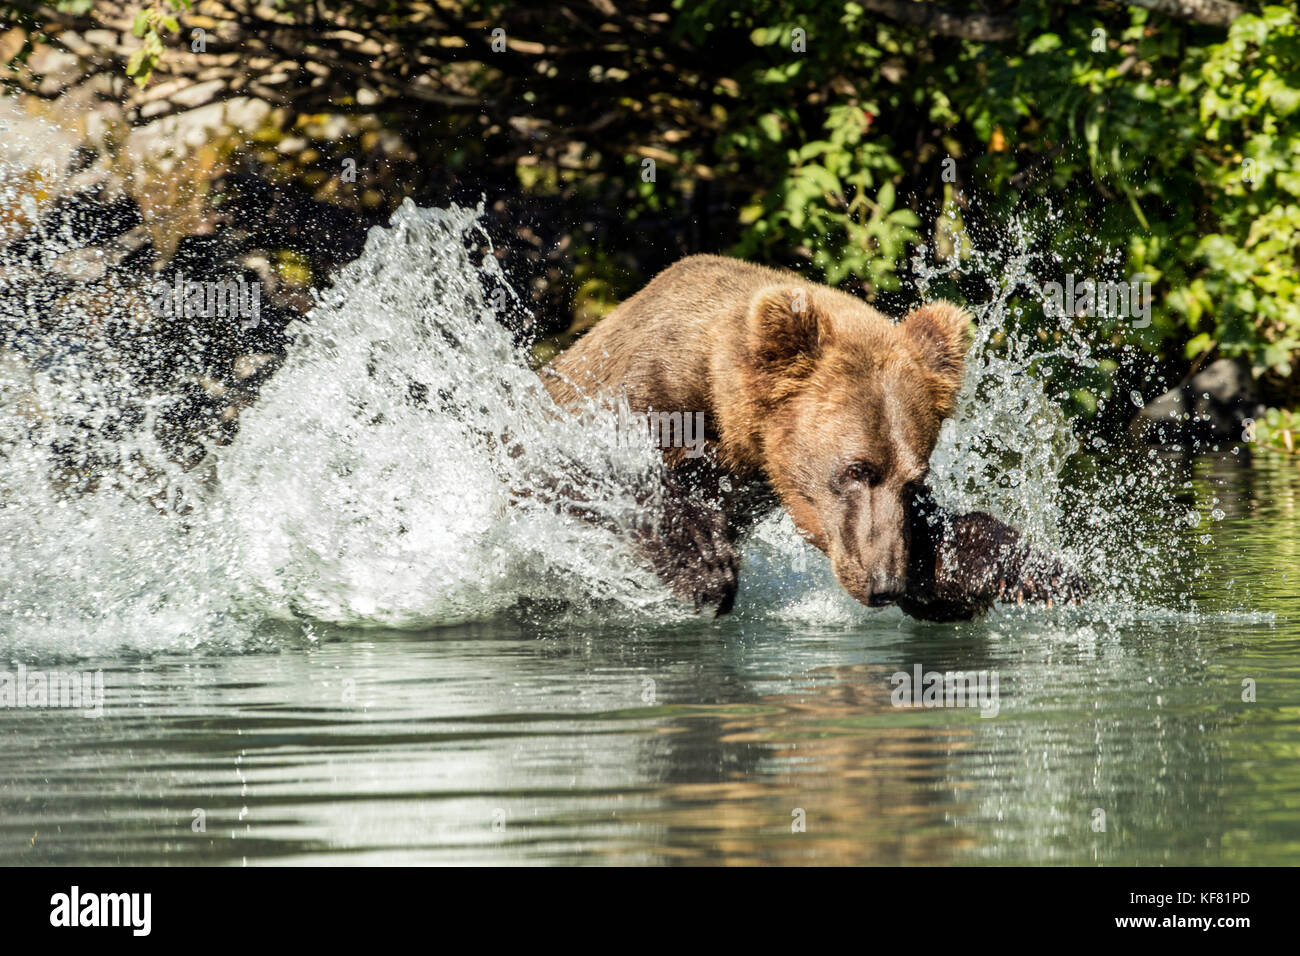 USA, Alaska, Redoubt Bay, Big River Lake, a brown grizzly bear catching fish in the waters near Wolverine Cove Stock Photo